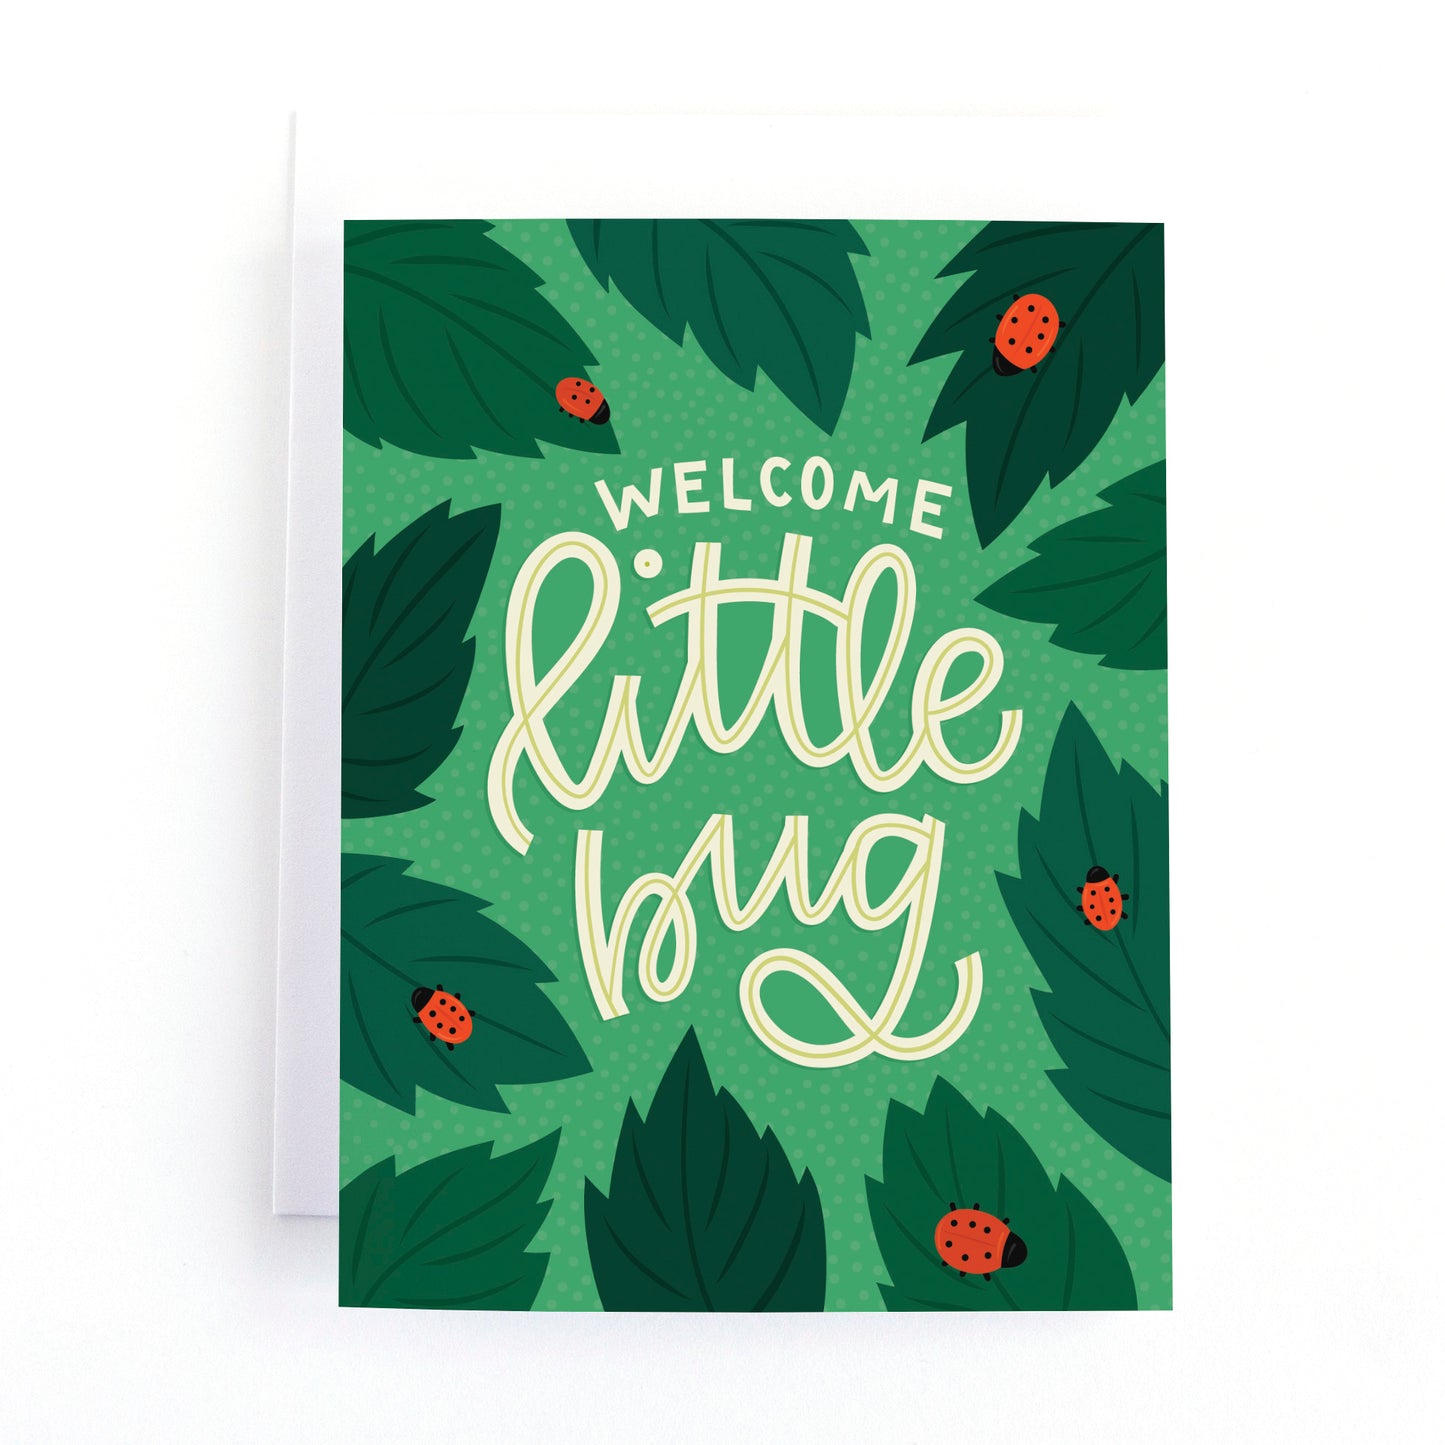 New baby card with a bright green background with leaves and ladybugs and the greeting, welcome little bug.